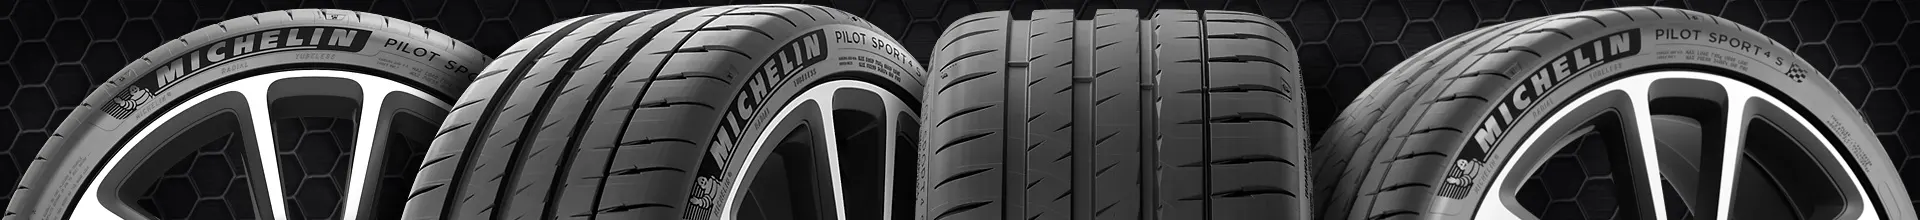 255 45 19 discount tires from Online Wheels Direct